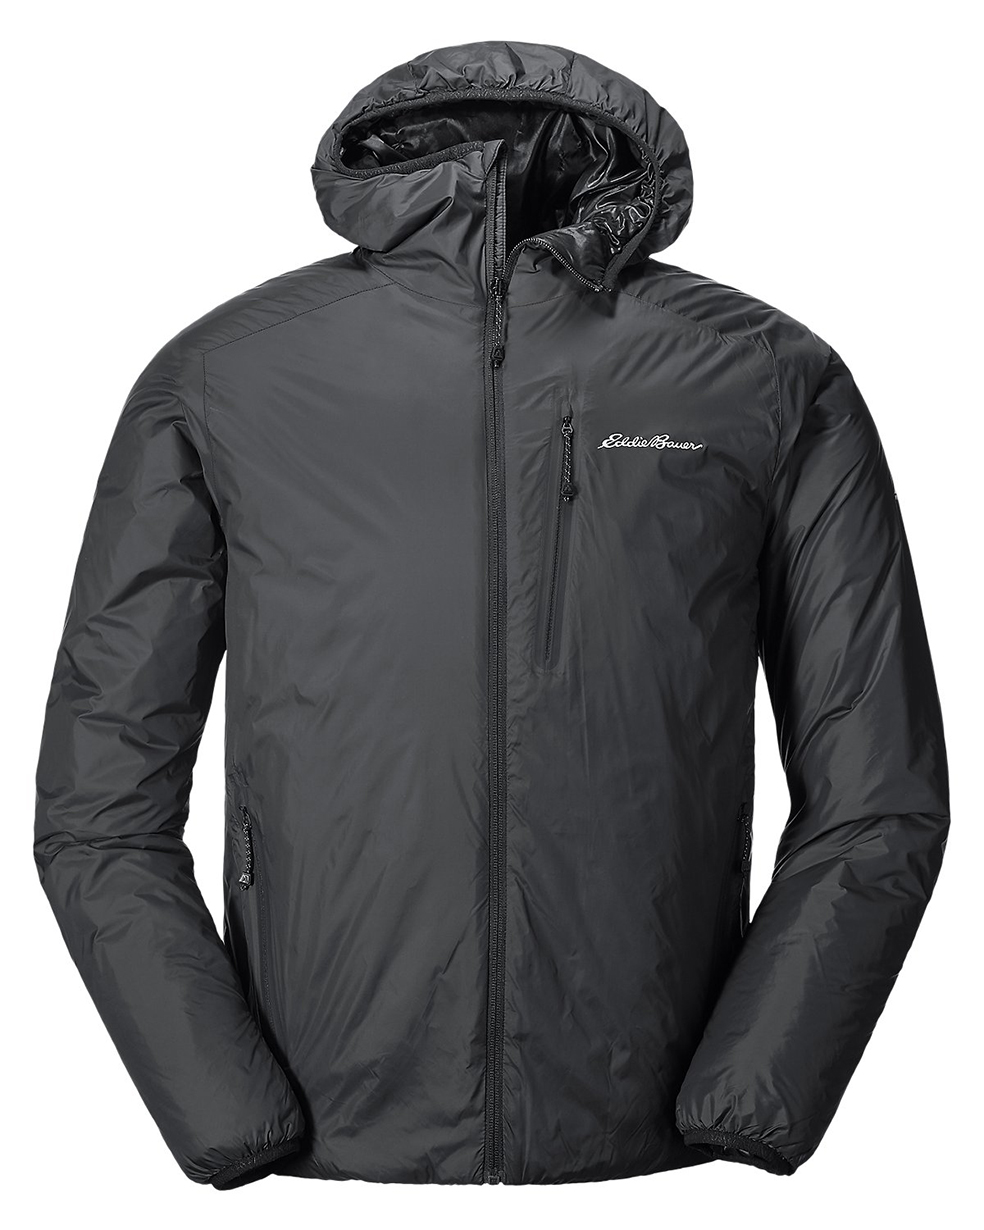 Sam Shaheen reviews the Eddie Bauer EverTherm Down Hooded Jacket for Blister